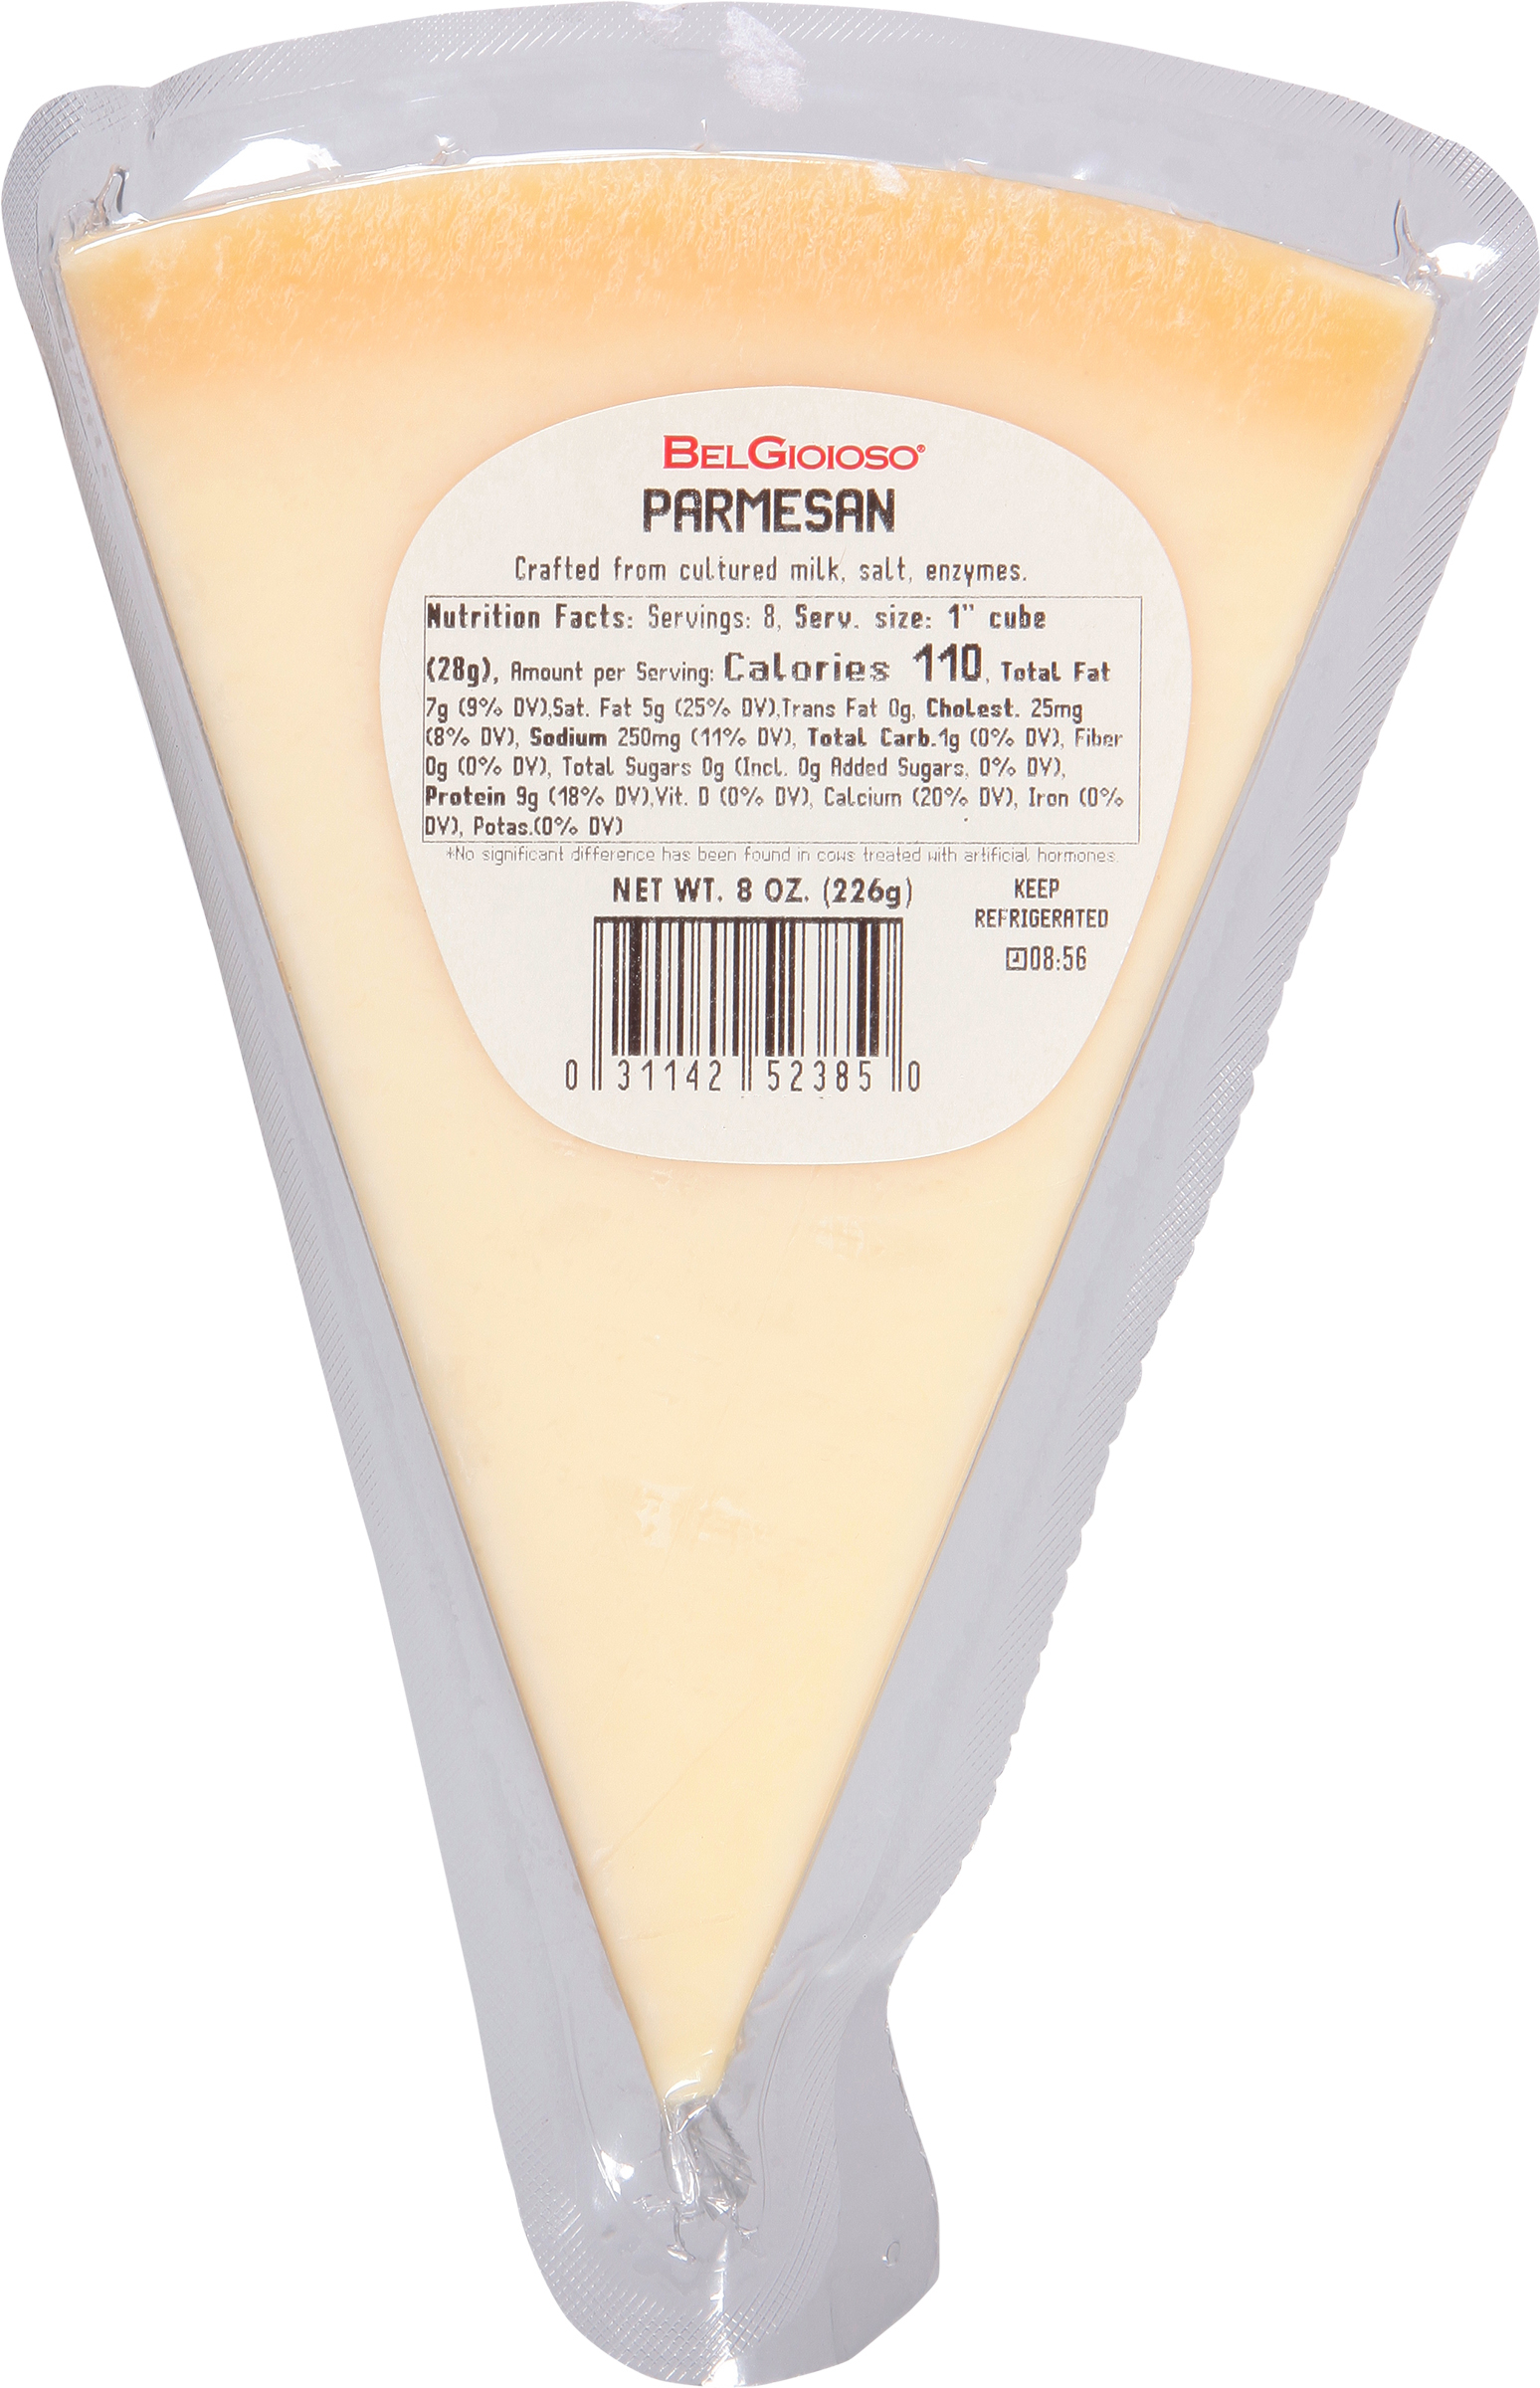 BelGioioso Parmesan Cheese Wedge Specialty Hard Cheese, 8 oz Refrigerated Plastic Packet - image 4 of 9